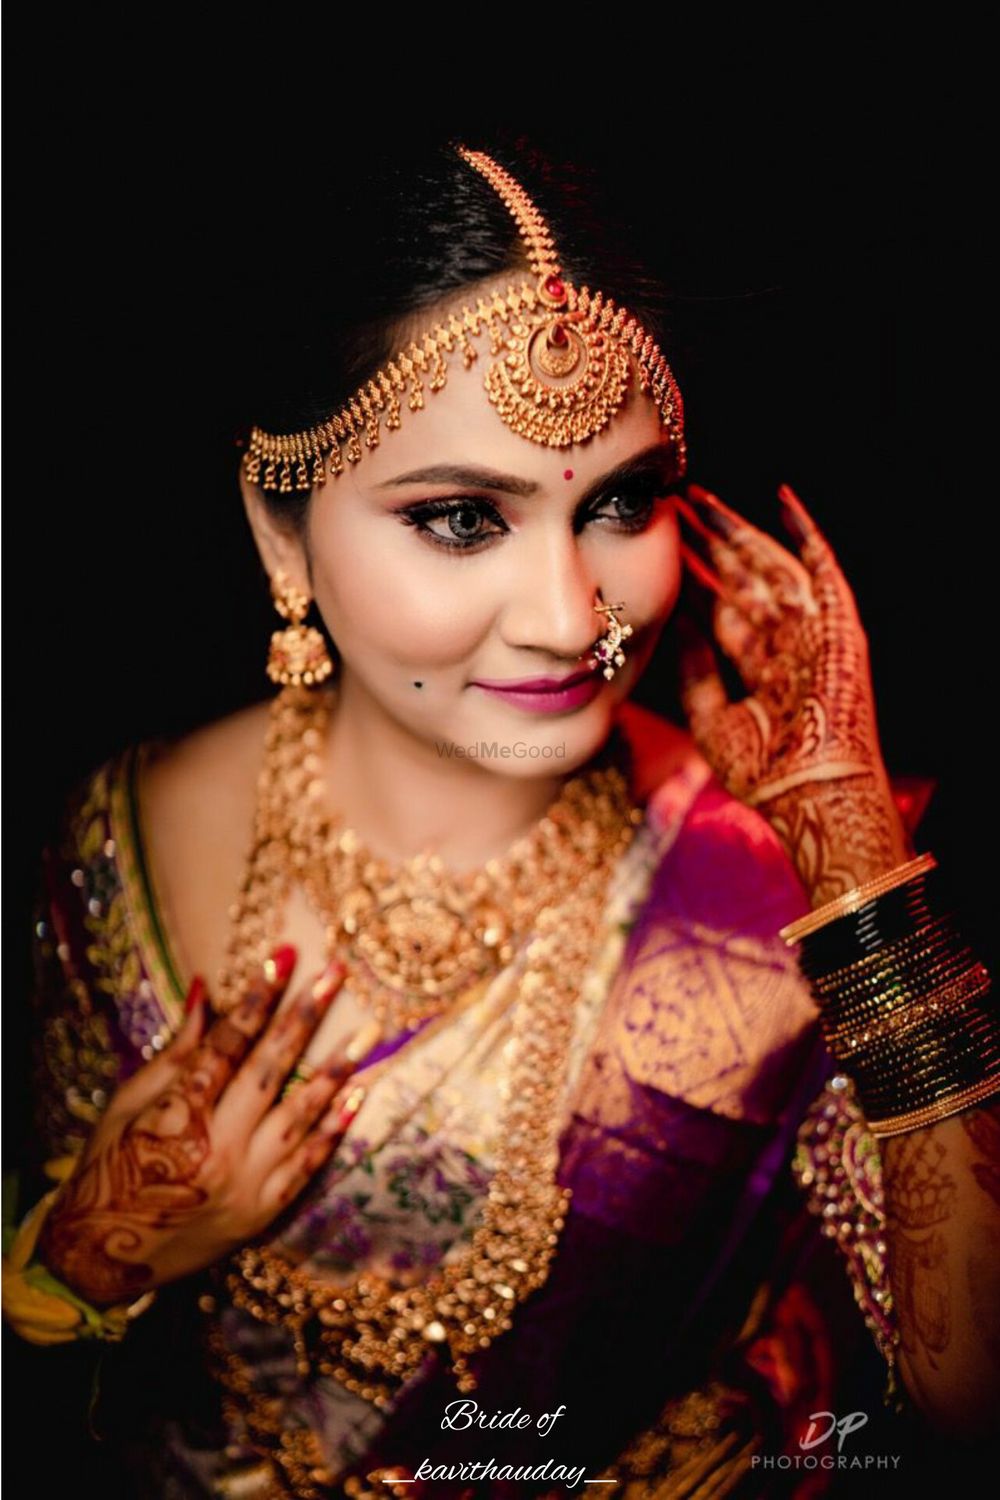 Photo From Makeovers by Kavi Uday - By Bride Factory Bangalore